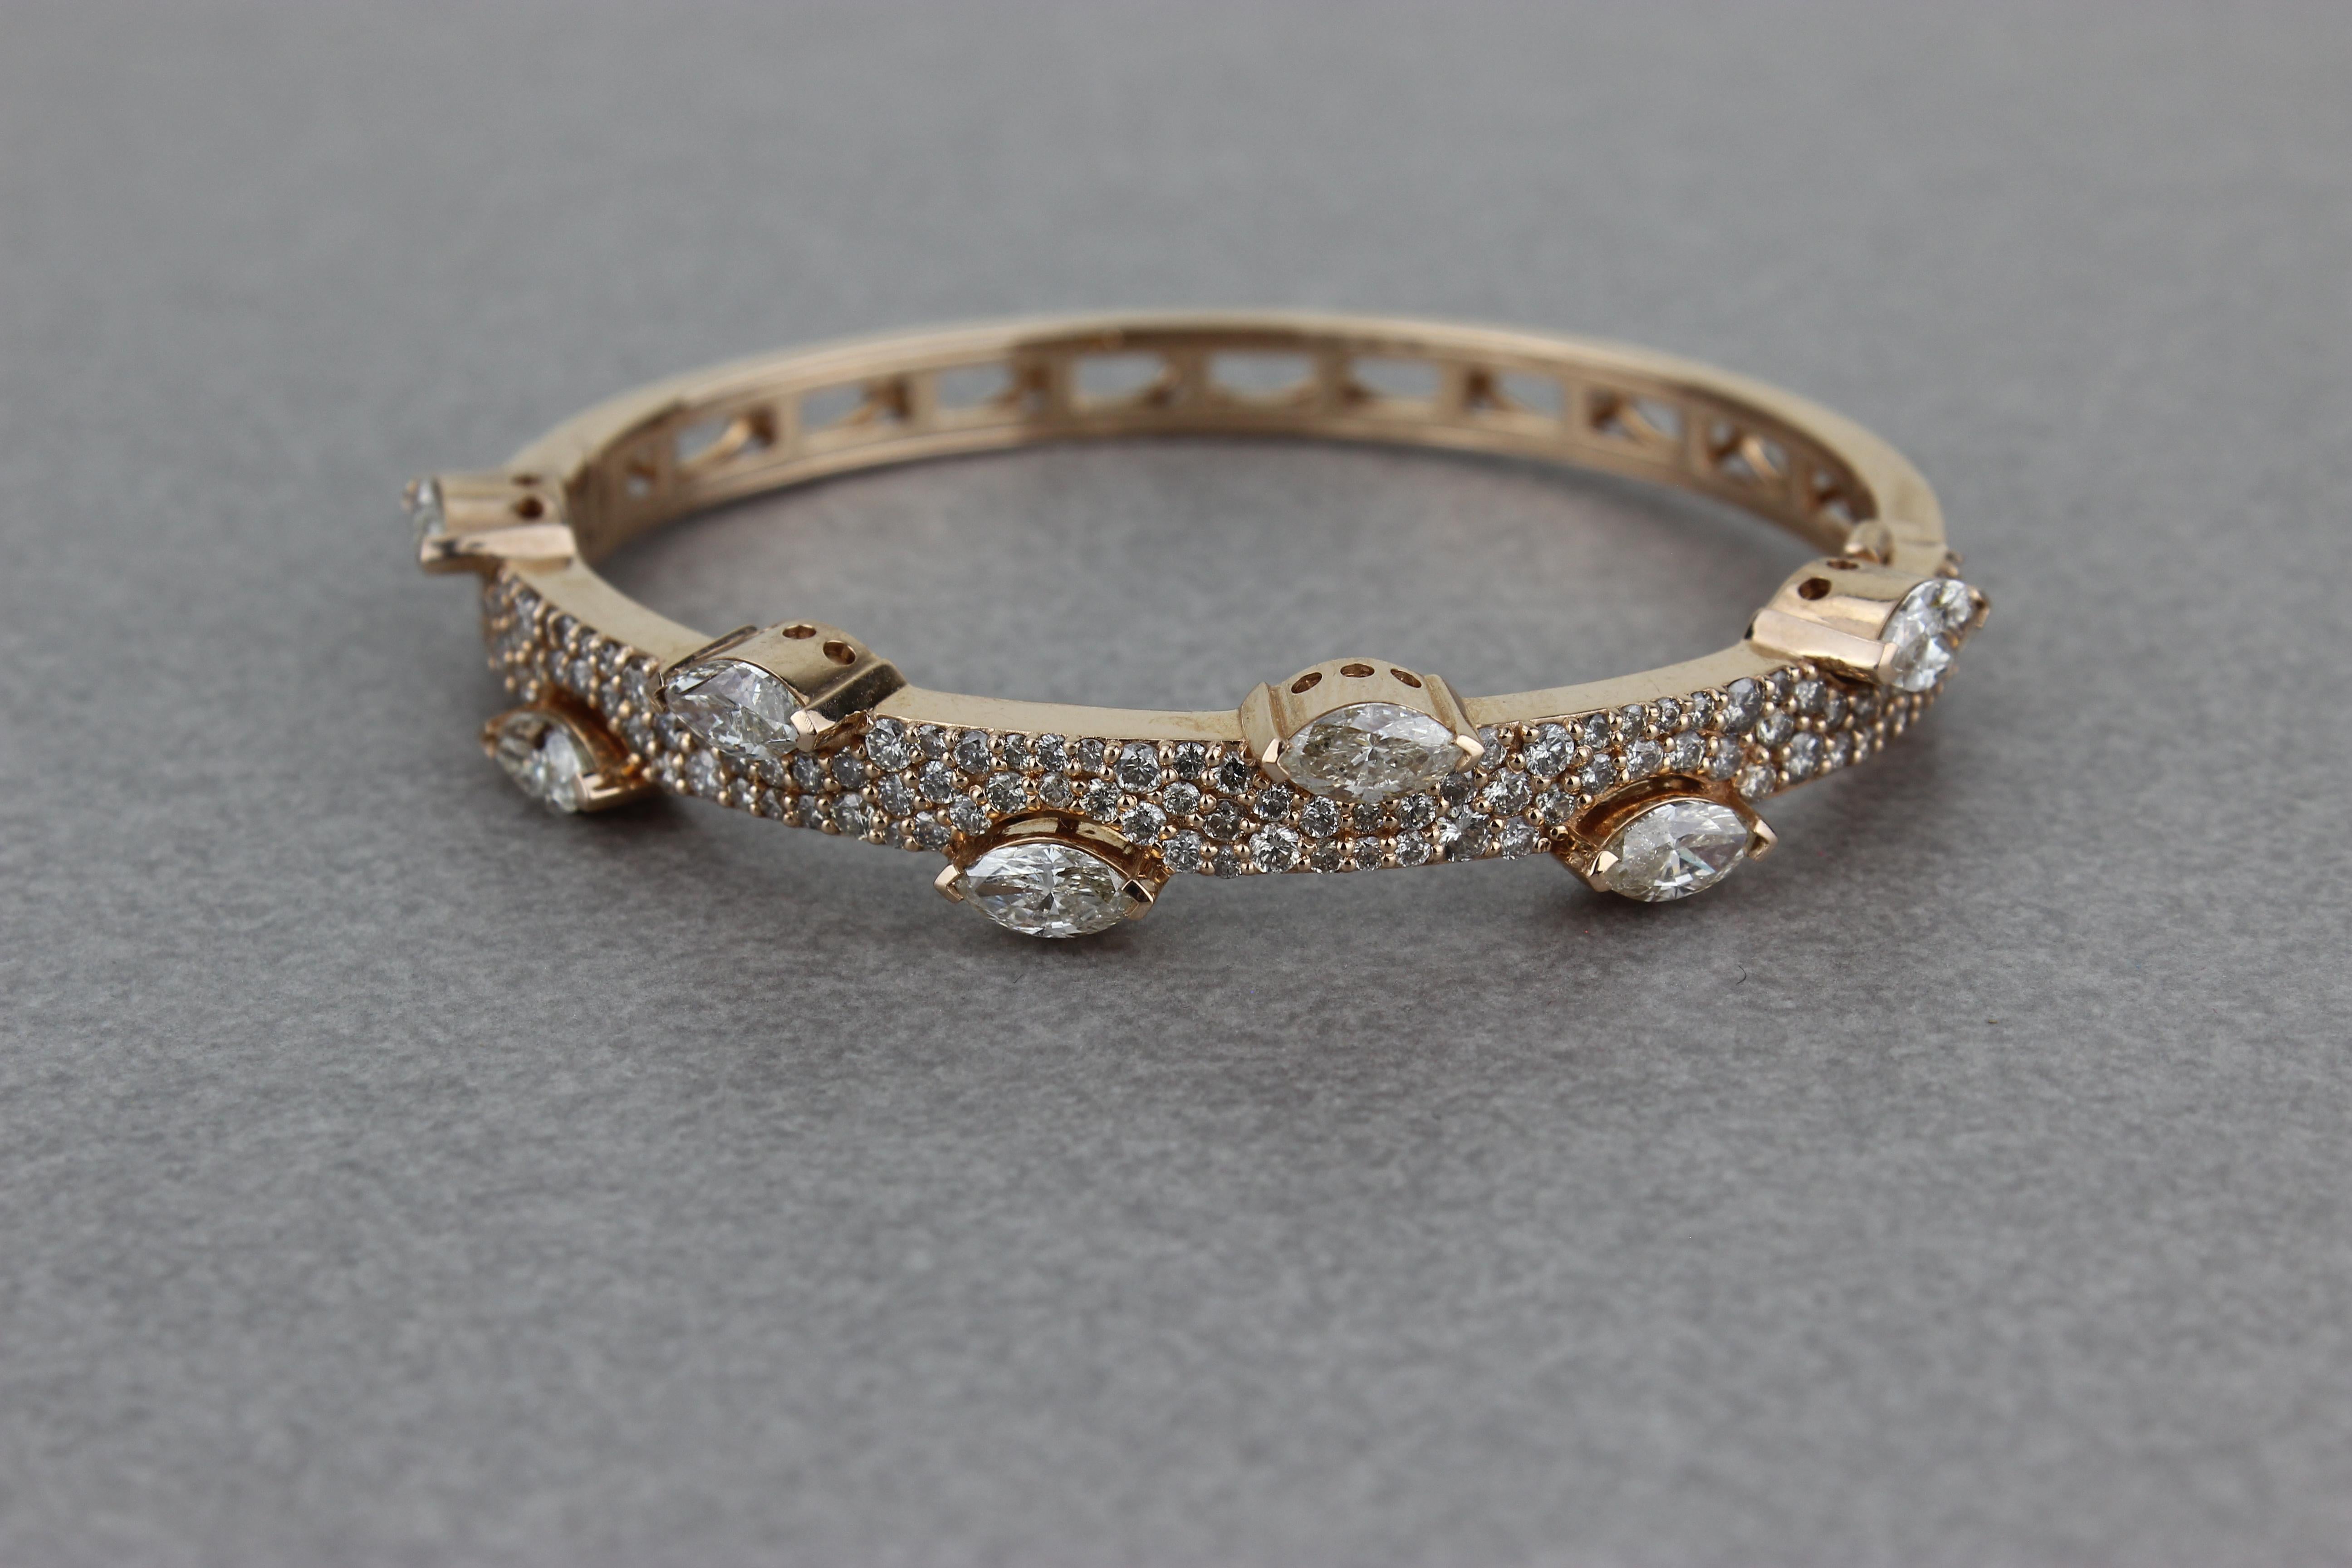 The Marquise Diamonds Half Bracelet is a luxurious and elegant jewelry piece with marquise-shaped diamonds set in solid 18k gold. The diamonds are arranged in a stunning design that showcases their unique shape and sparkle, with the marquise